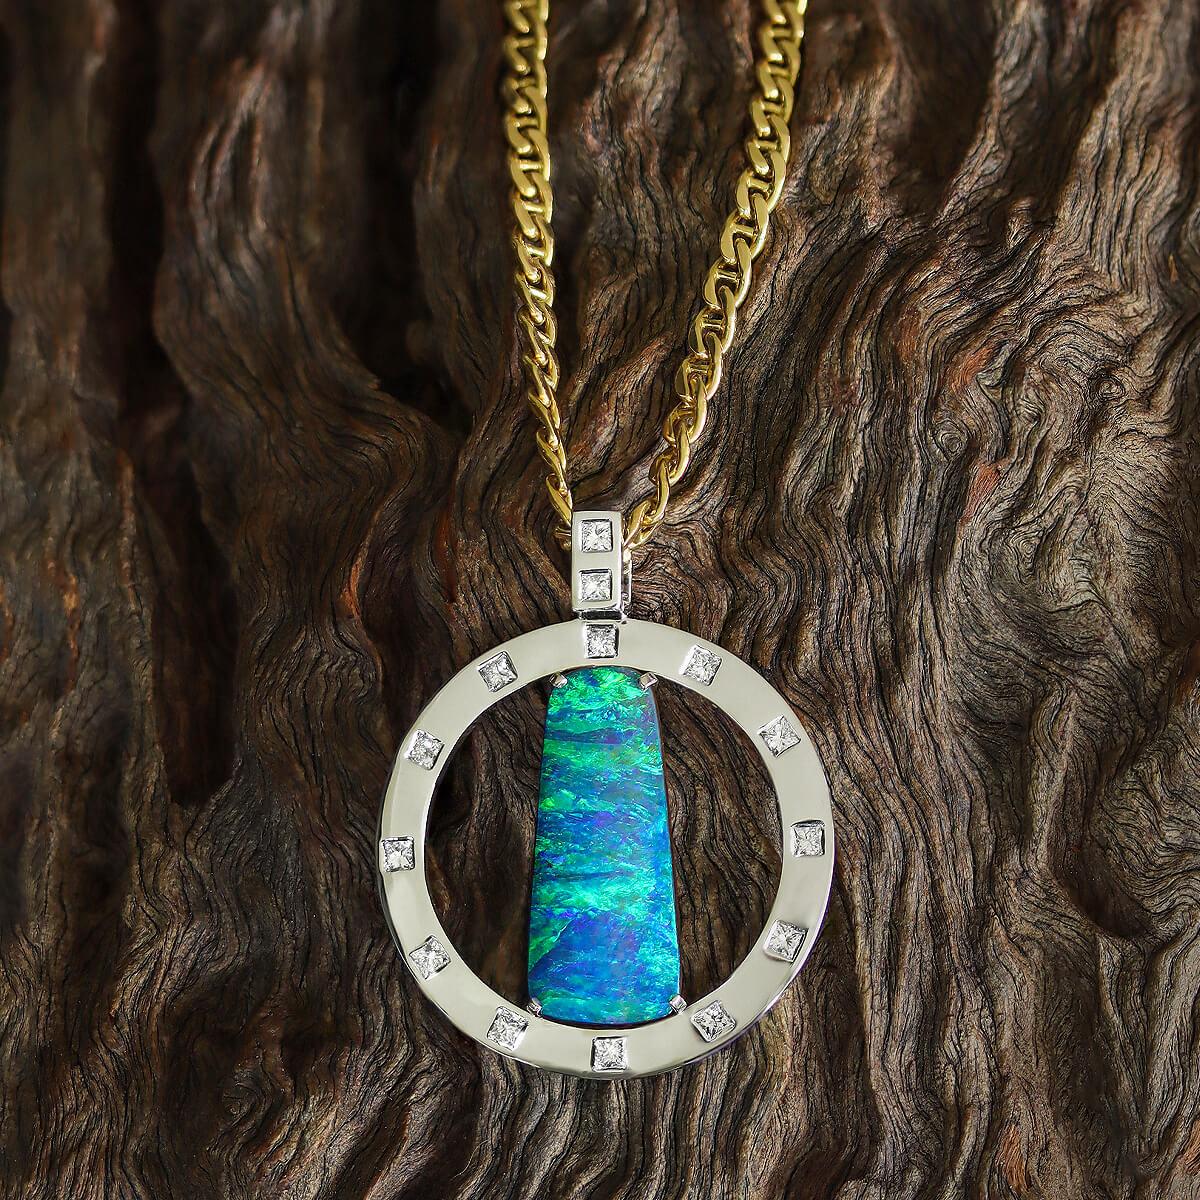 Drawn to this amazing piece? It is hard not to be. A very special blue green boulder opal with intense colour that is always on show. She will take you away to a tropical ocean, with clear blue waters and swaying palms.

The outer ring is solid